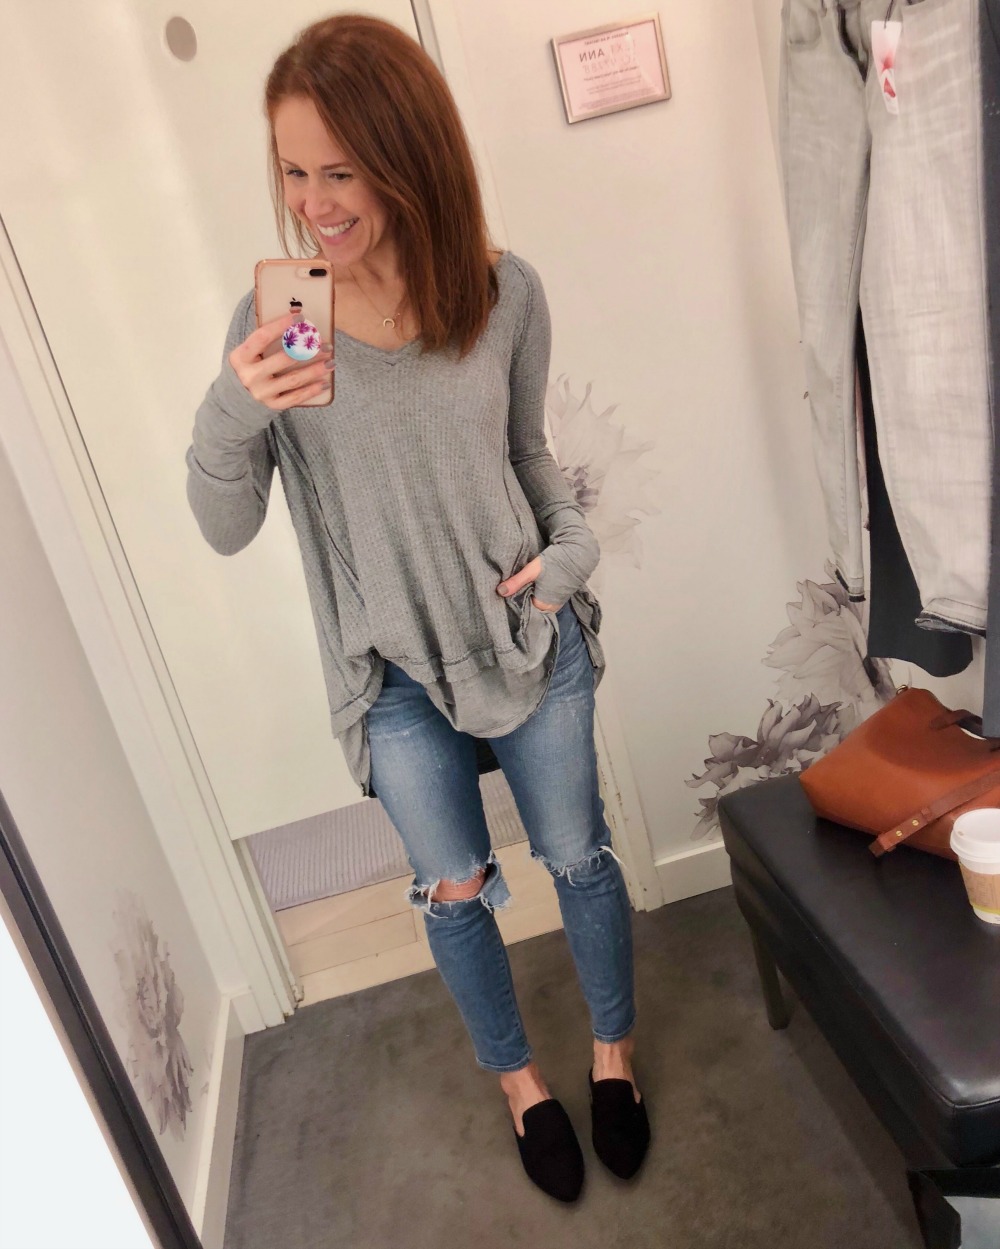 Easy casual look in Free People laguna thermal, Citizens of Humanity denim and Target slides - January 2018 Current Favorites by popular Florida lifestyle blogger The Modern Savvy